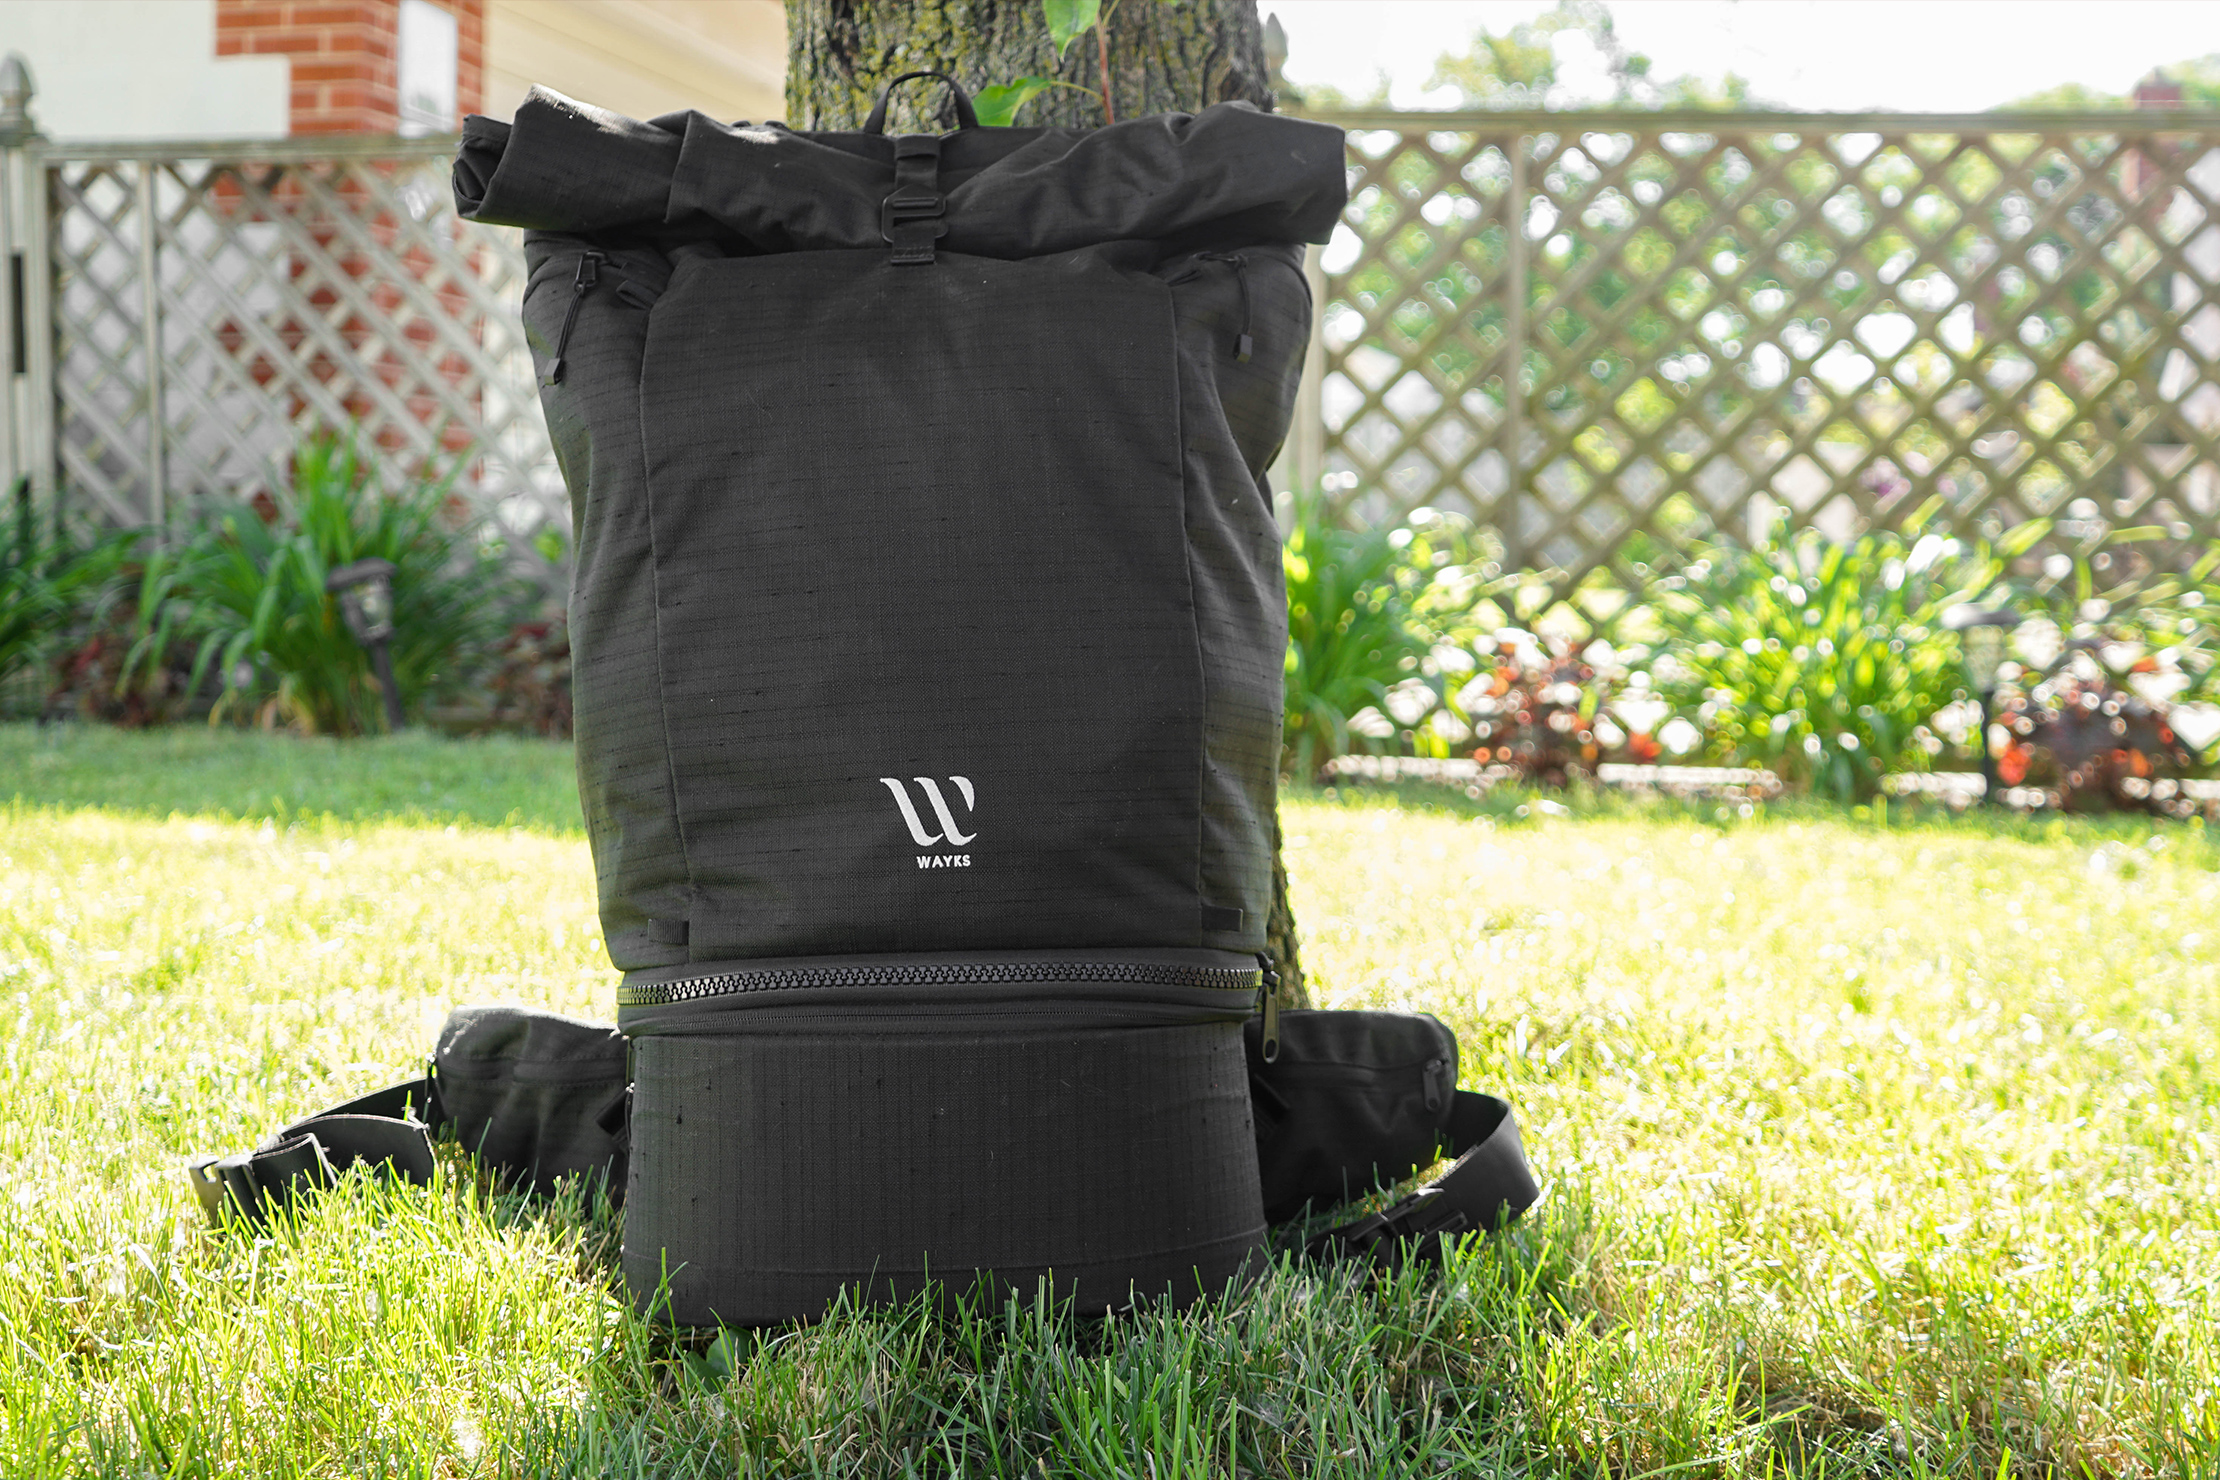 WAYKS Travel Backpack Review